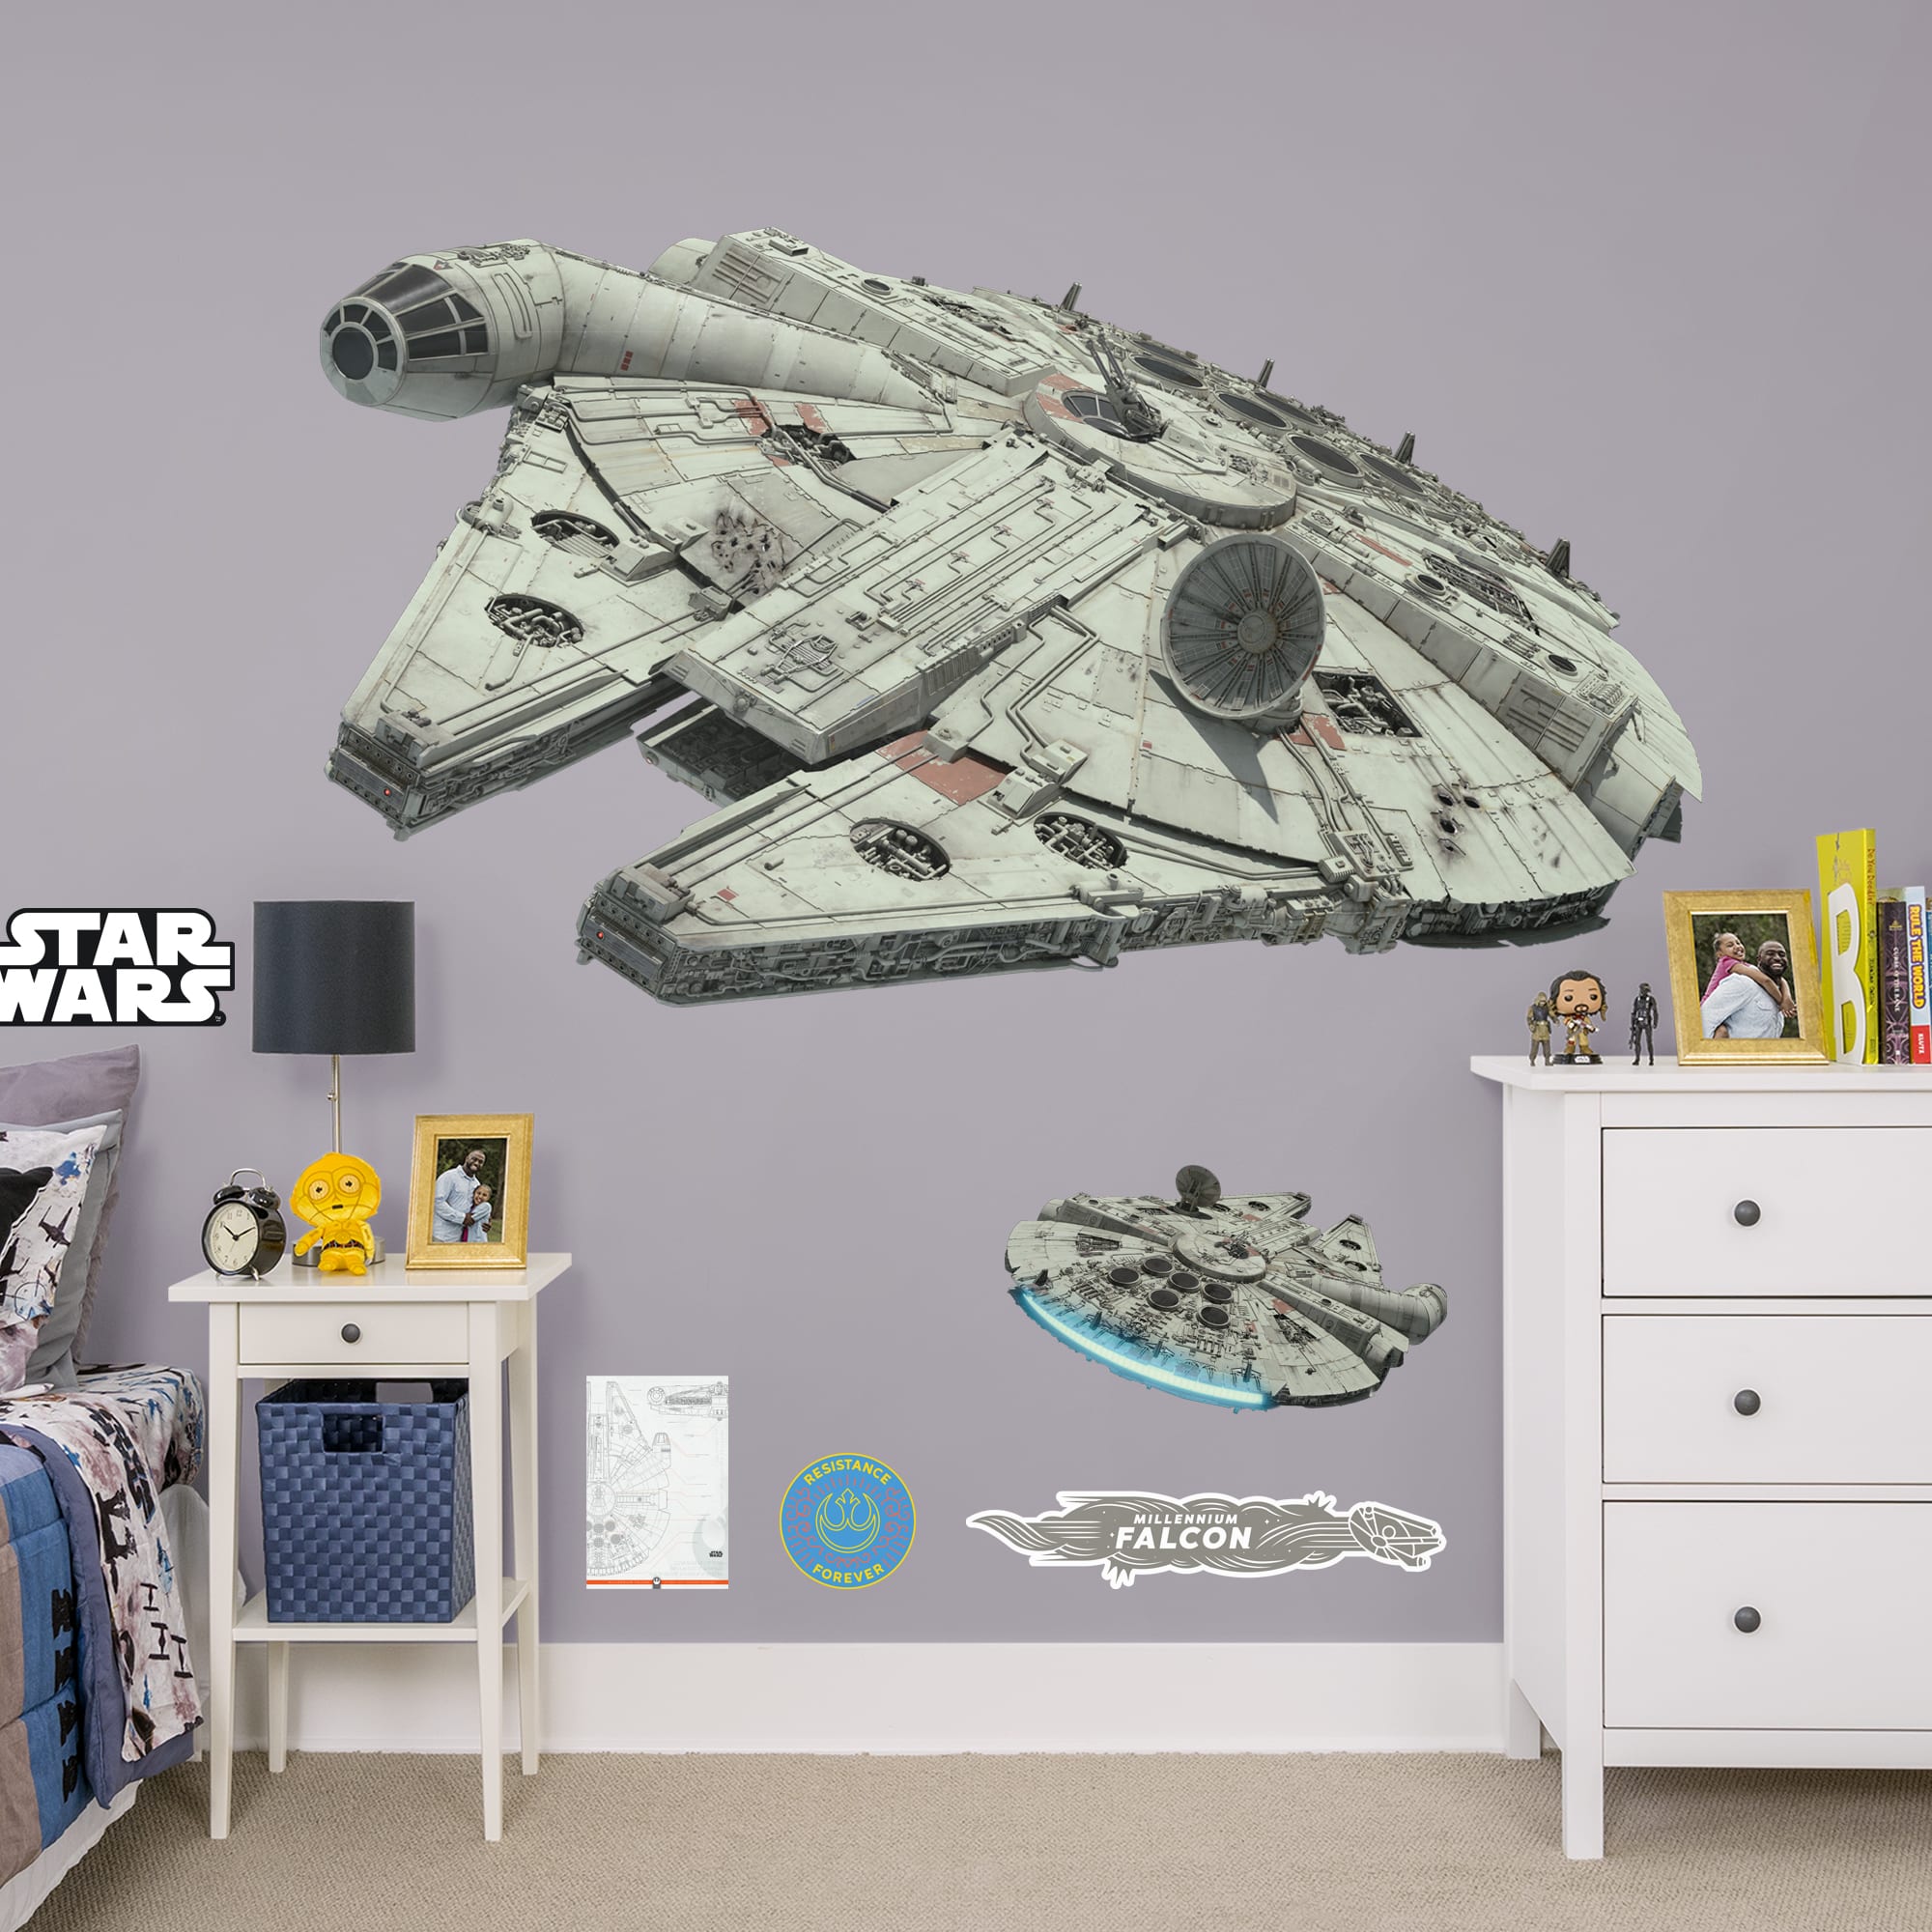 Millennium Falcon - Star Wars: The Rise of Skywalker - Officially Licensed Removable Wall Decal Huge Ship + 6 Decals (78"W x 44"